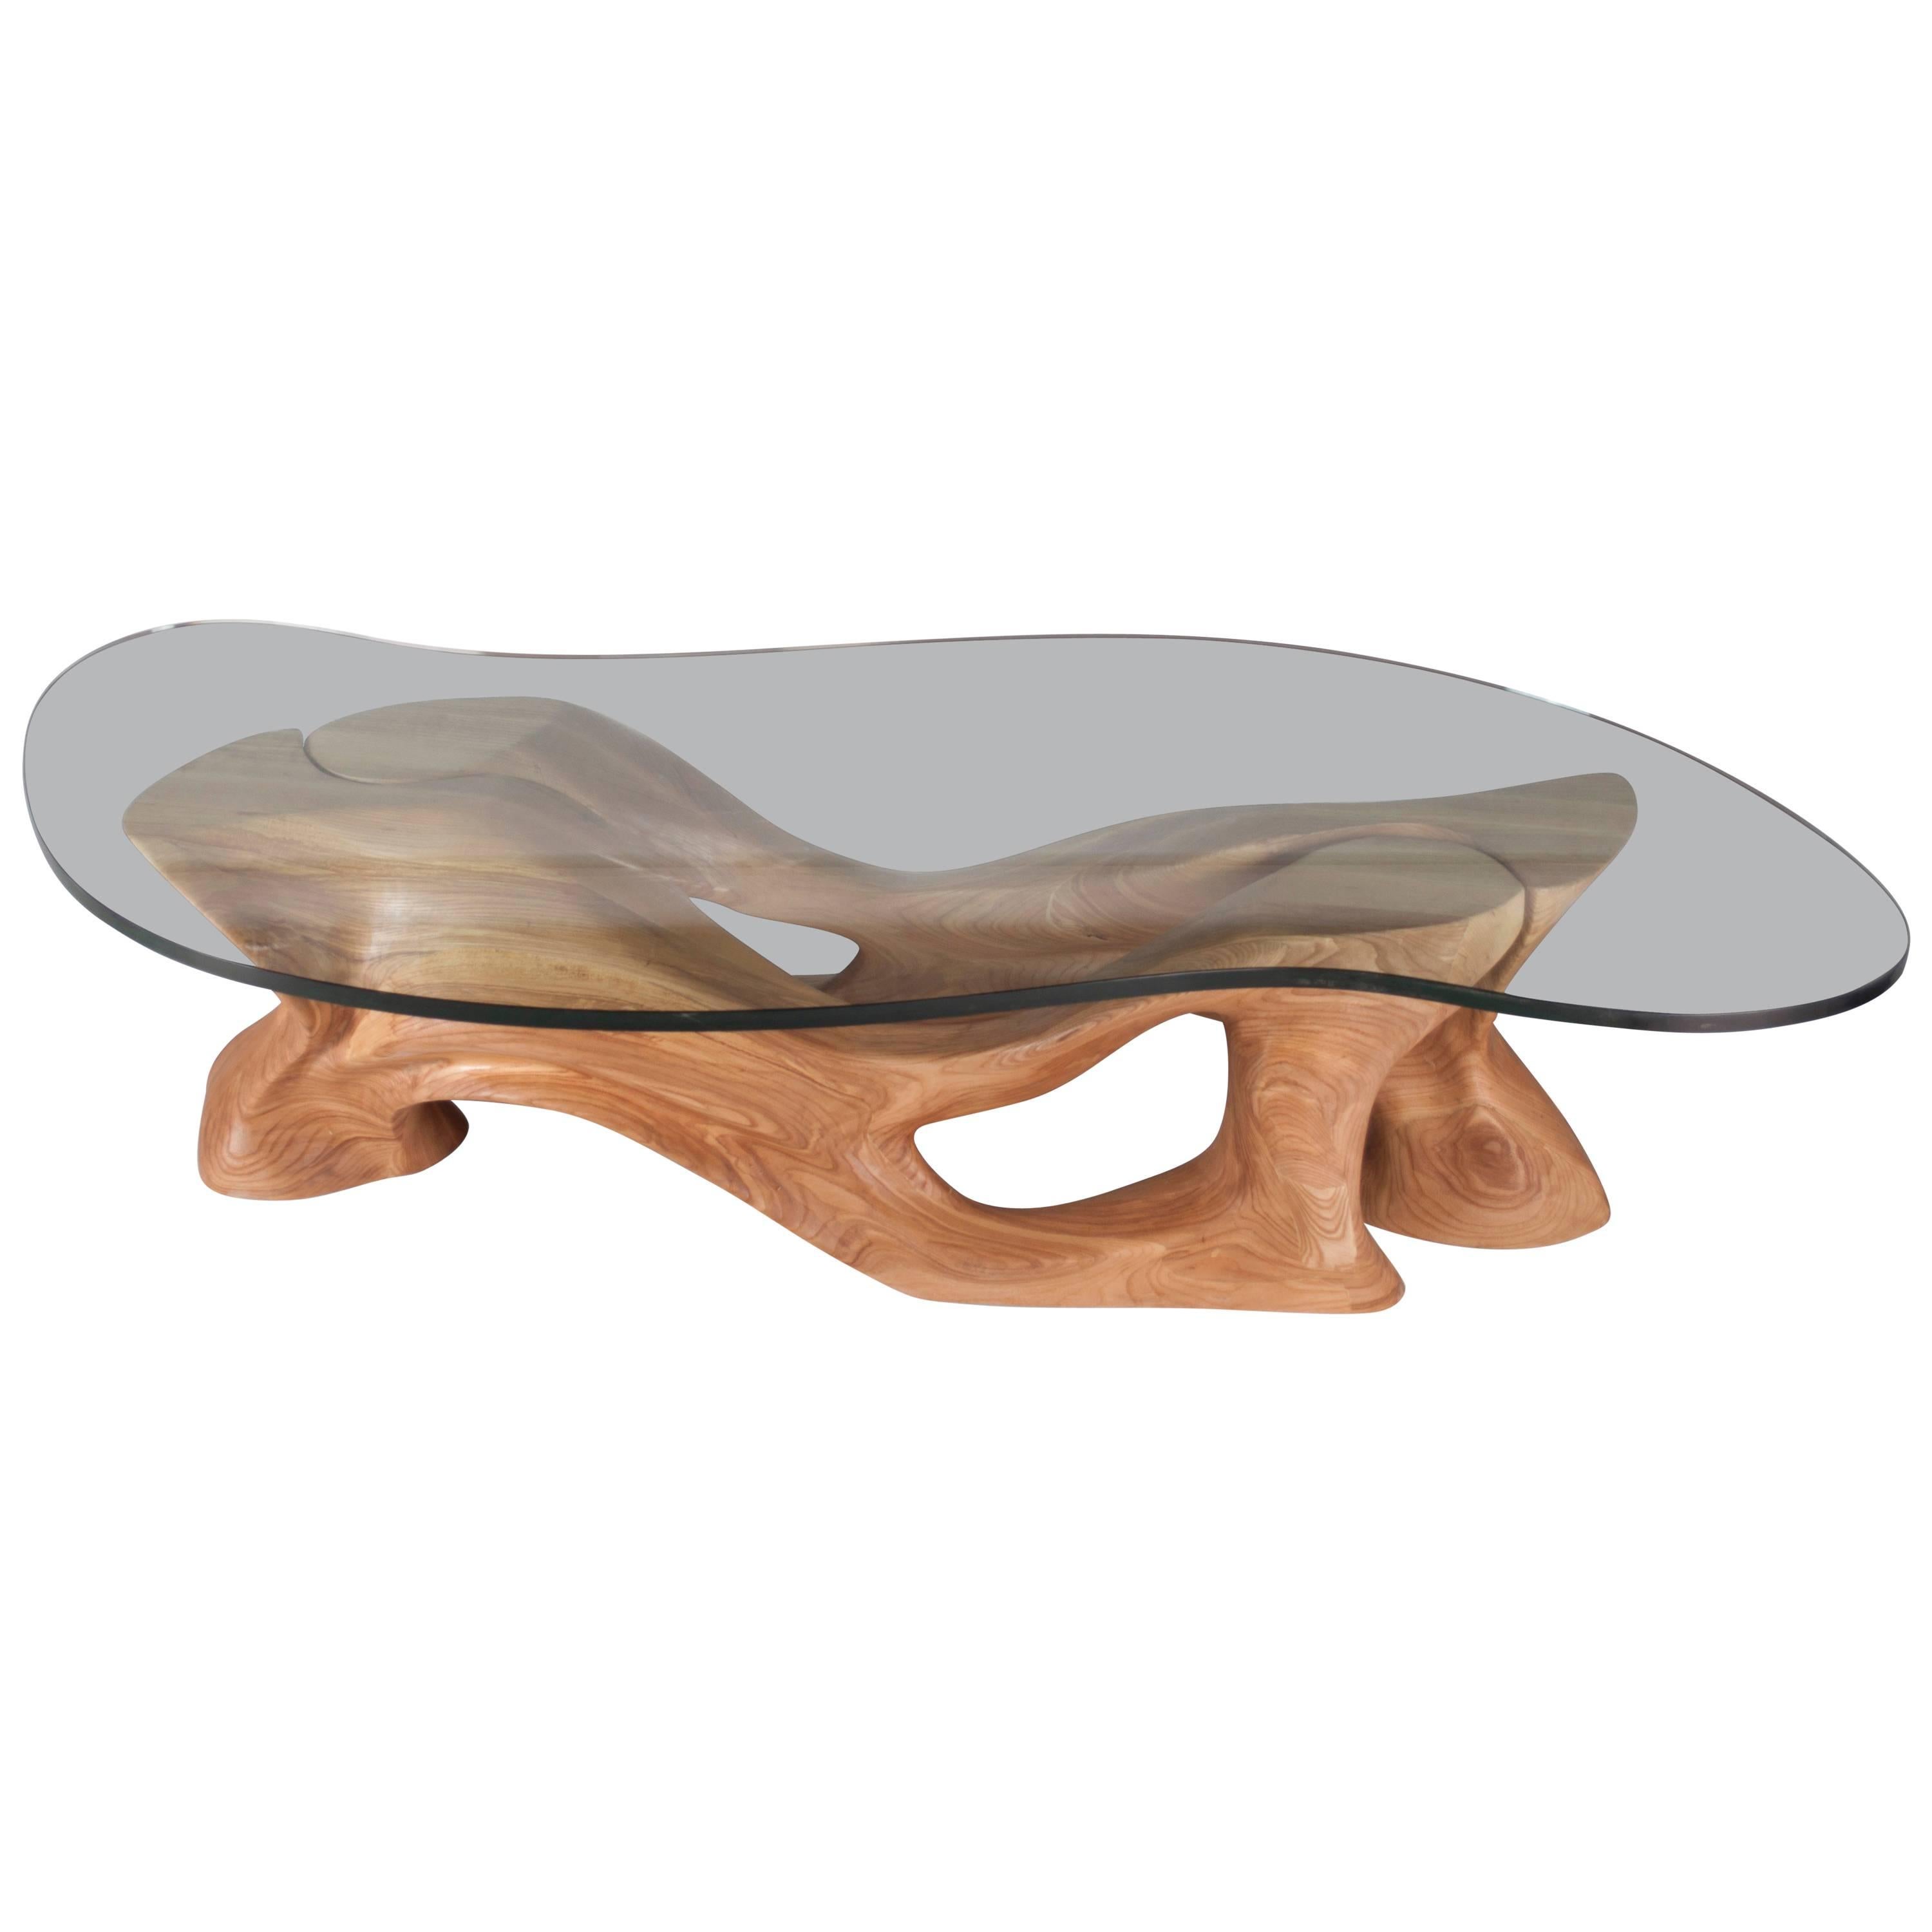 Amorph Crux Coffee Table Honey stain on Ash wood with Organic Shaped Glass